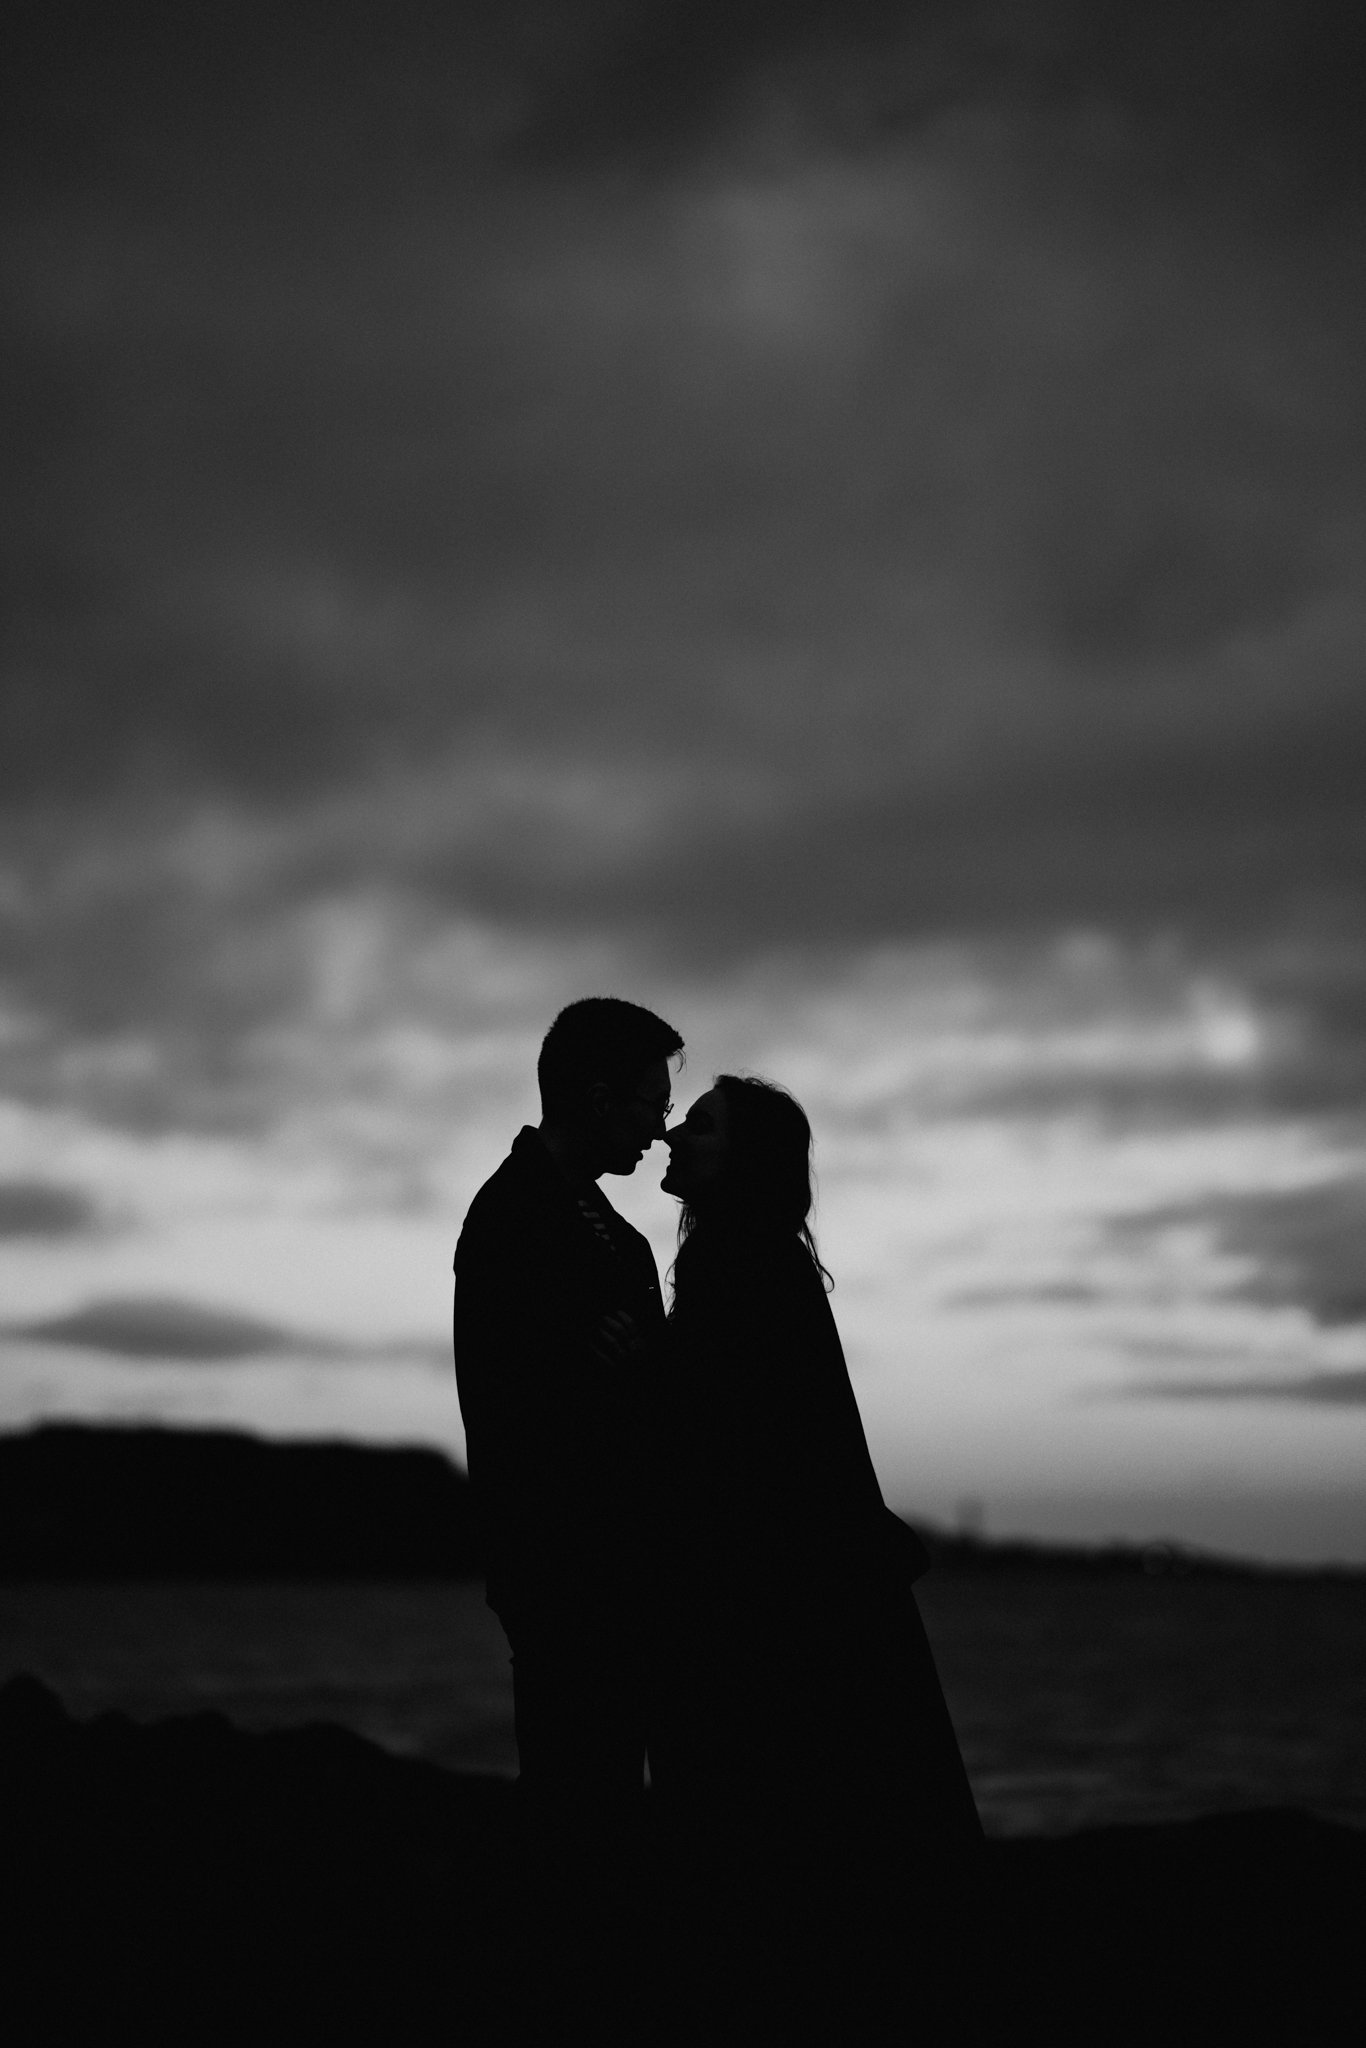  An Intimate Engagement/Adventure Couple Session in Scotland. 